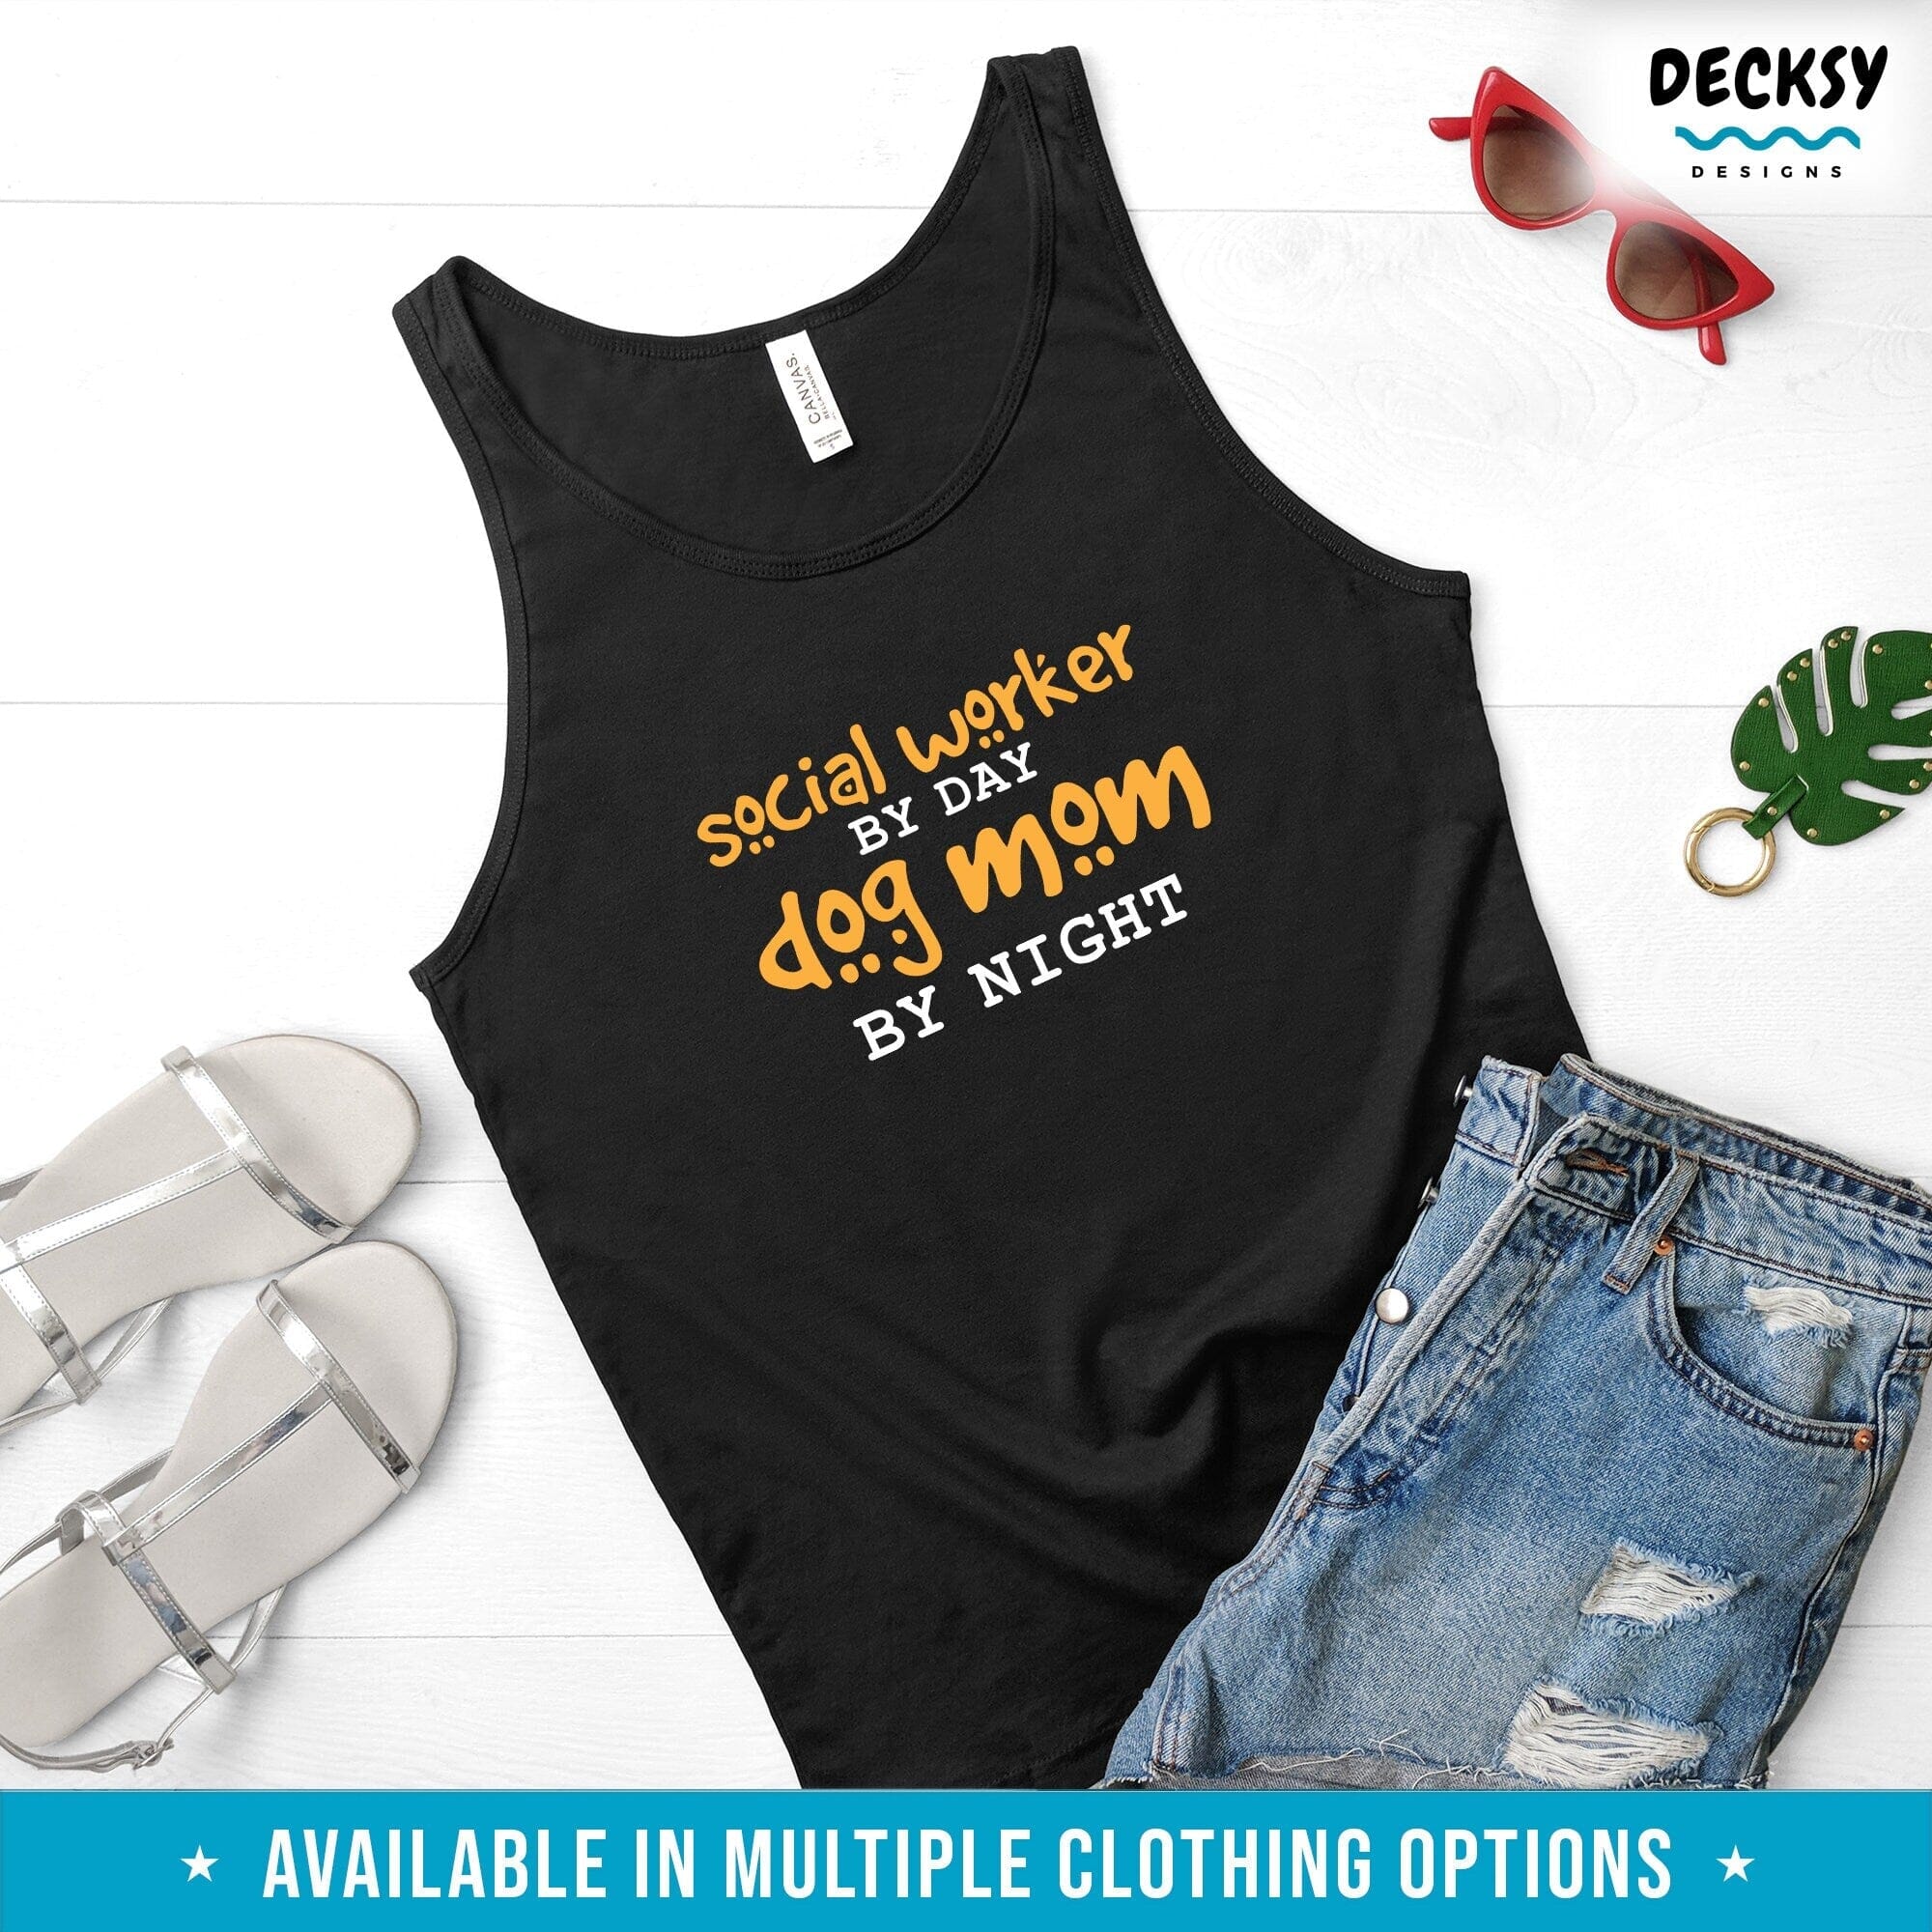 Social Worker Dog Mom Shirt, Funny Social Worker Gift-Clothing:Gender-Neutral Adult Clothing:Tops & Tees:T-shirts:Graphic Tees-DecksyDesigns